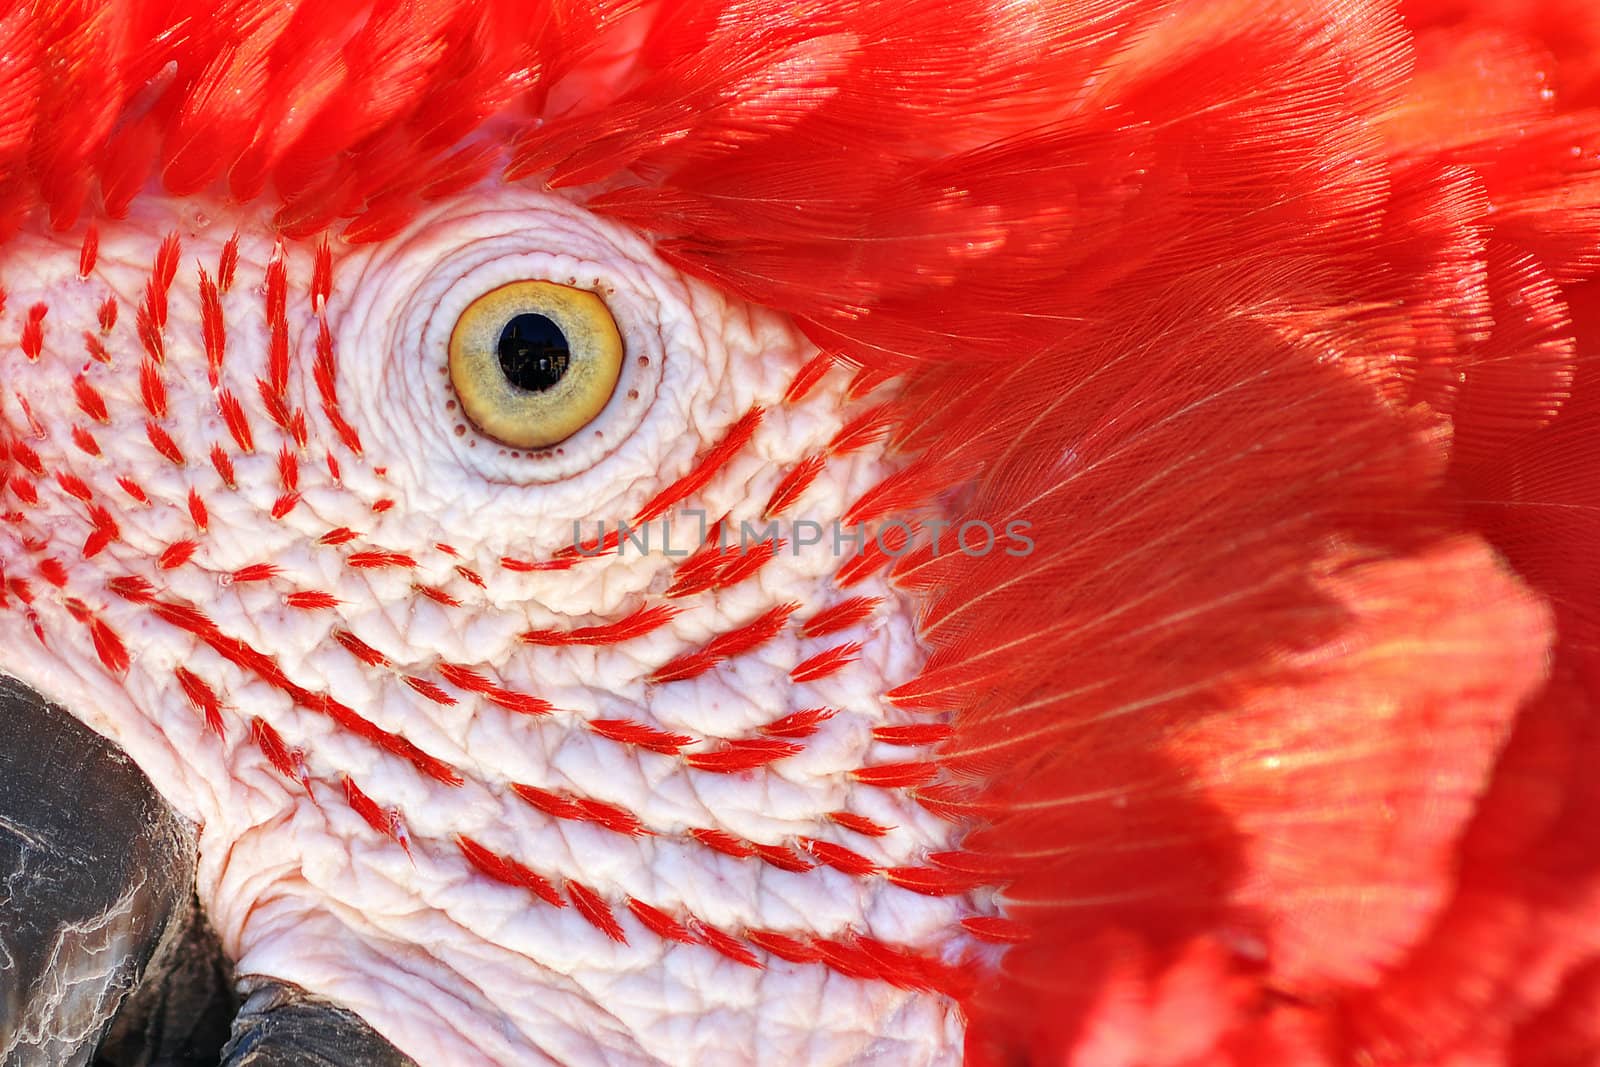 A closeup of the face of a scarlet macaw.